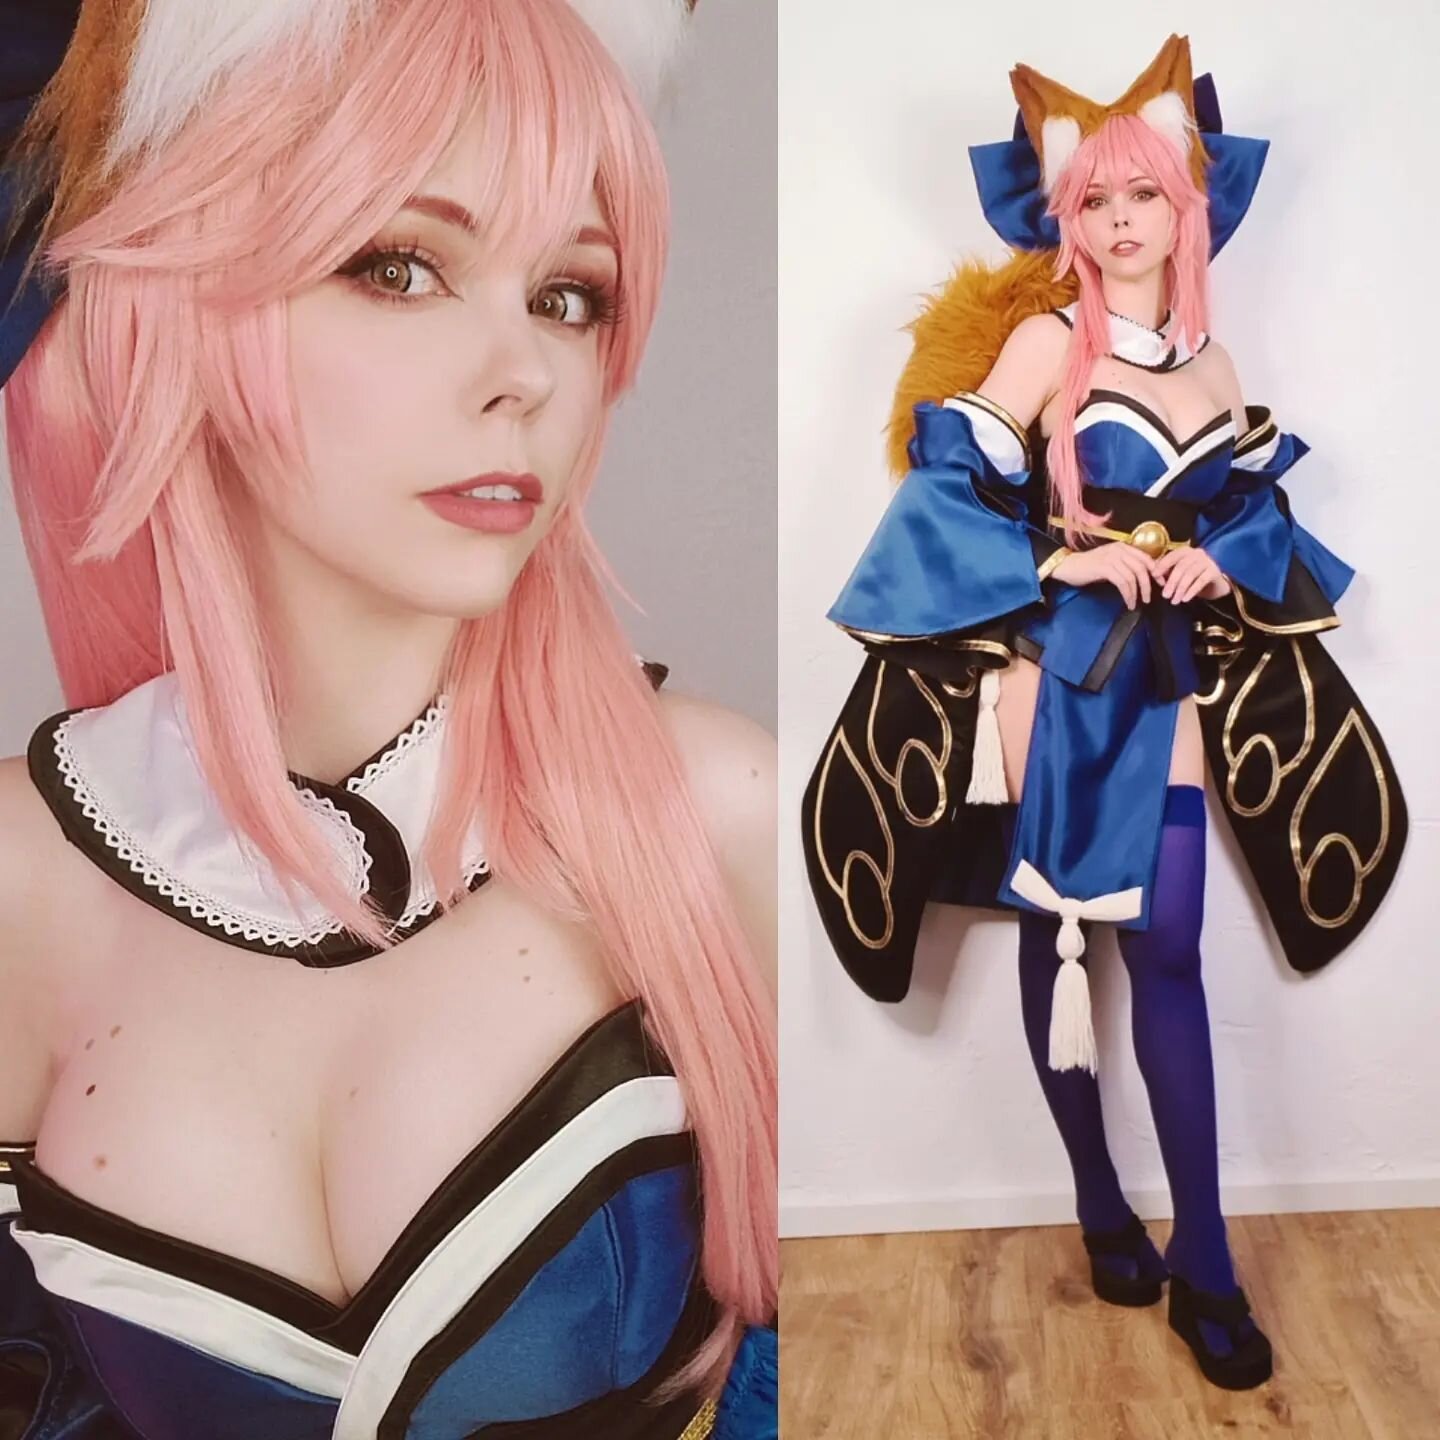 New costume ♡ Swipe for plenty of TAMAMO selfies!

This gorgeous costume is made by the talented @jtstudio.cosplayart ♡♡♡.
She is a commissioner who handmakes every detail on the costumes. I love her work on this Tamamo costume.

I always wanted to c